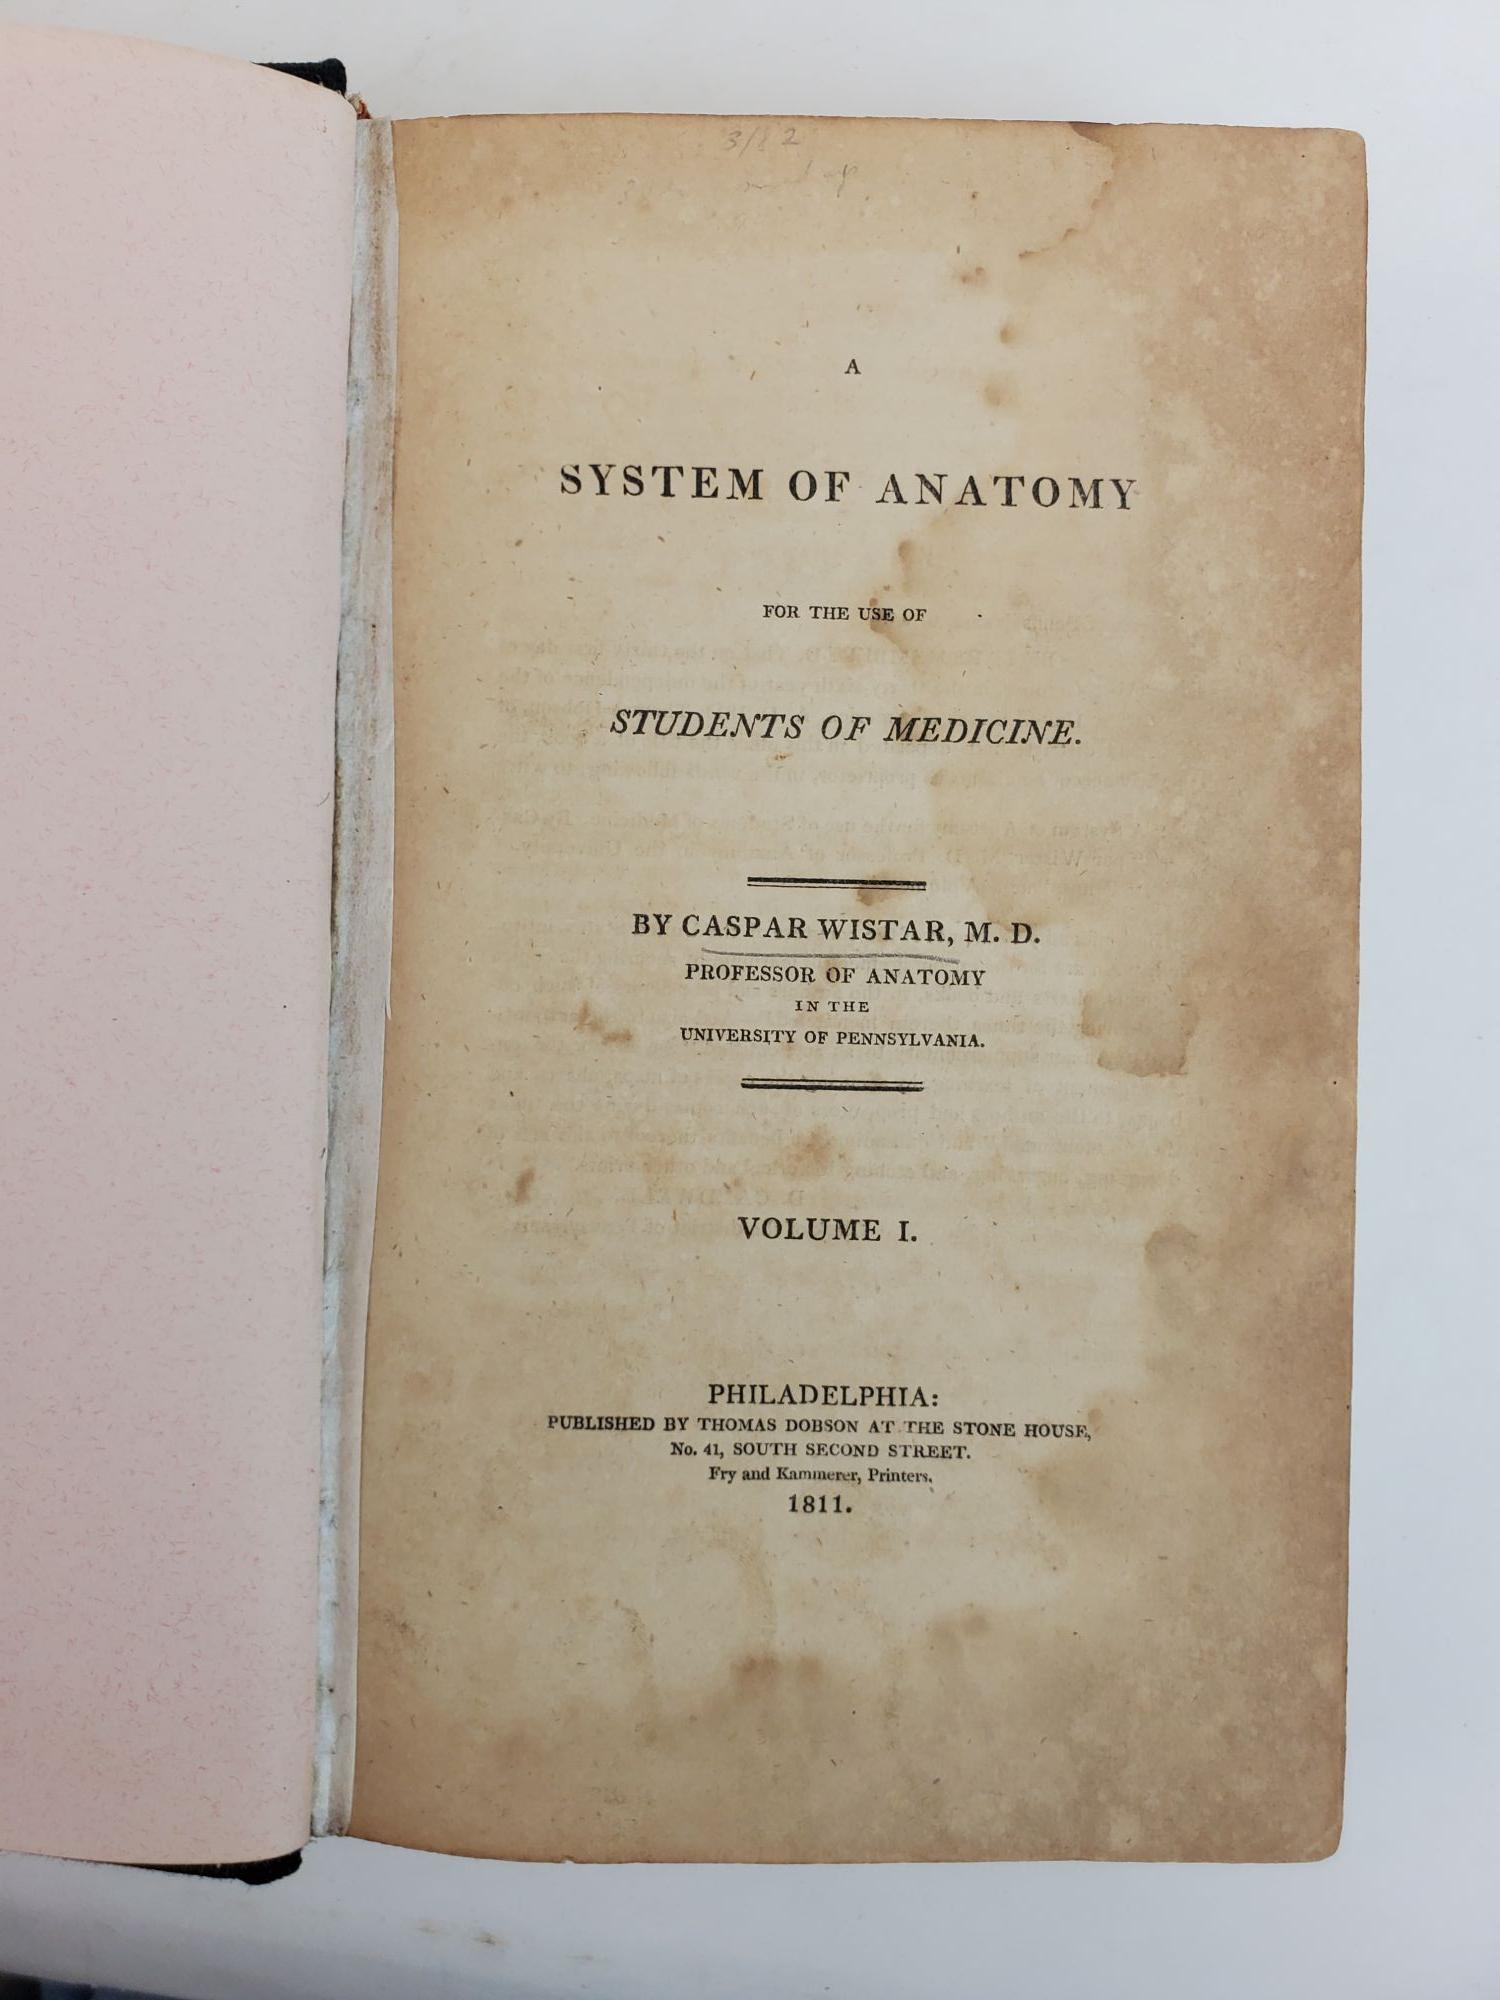 Product Image for A SYSTEM OF ANATOMY FOR THE USE OF STUDENTS [Five Parts in Three Volumes]